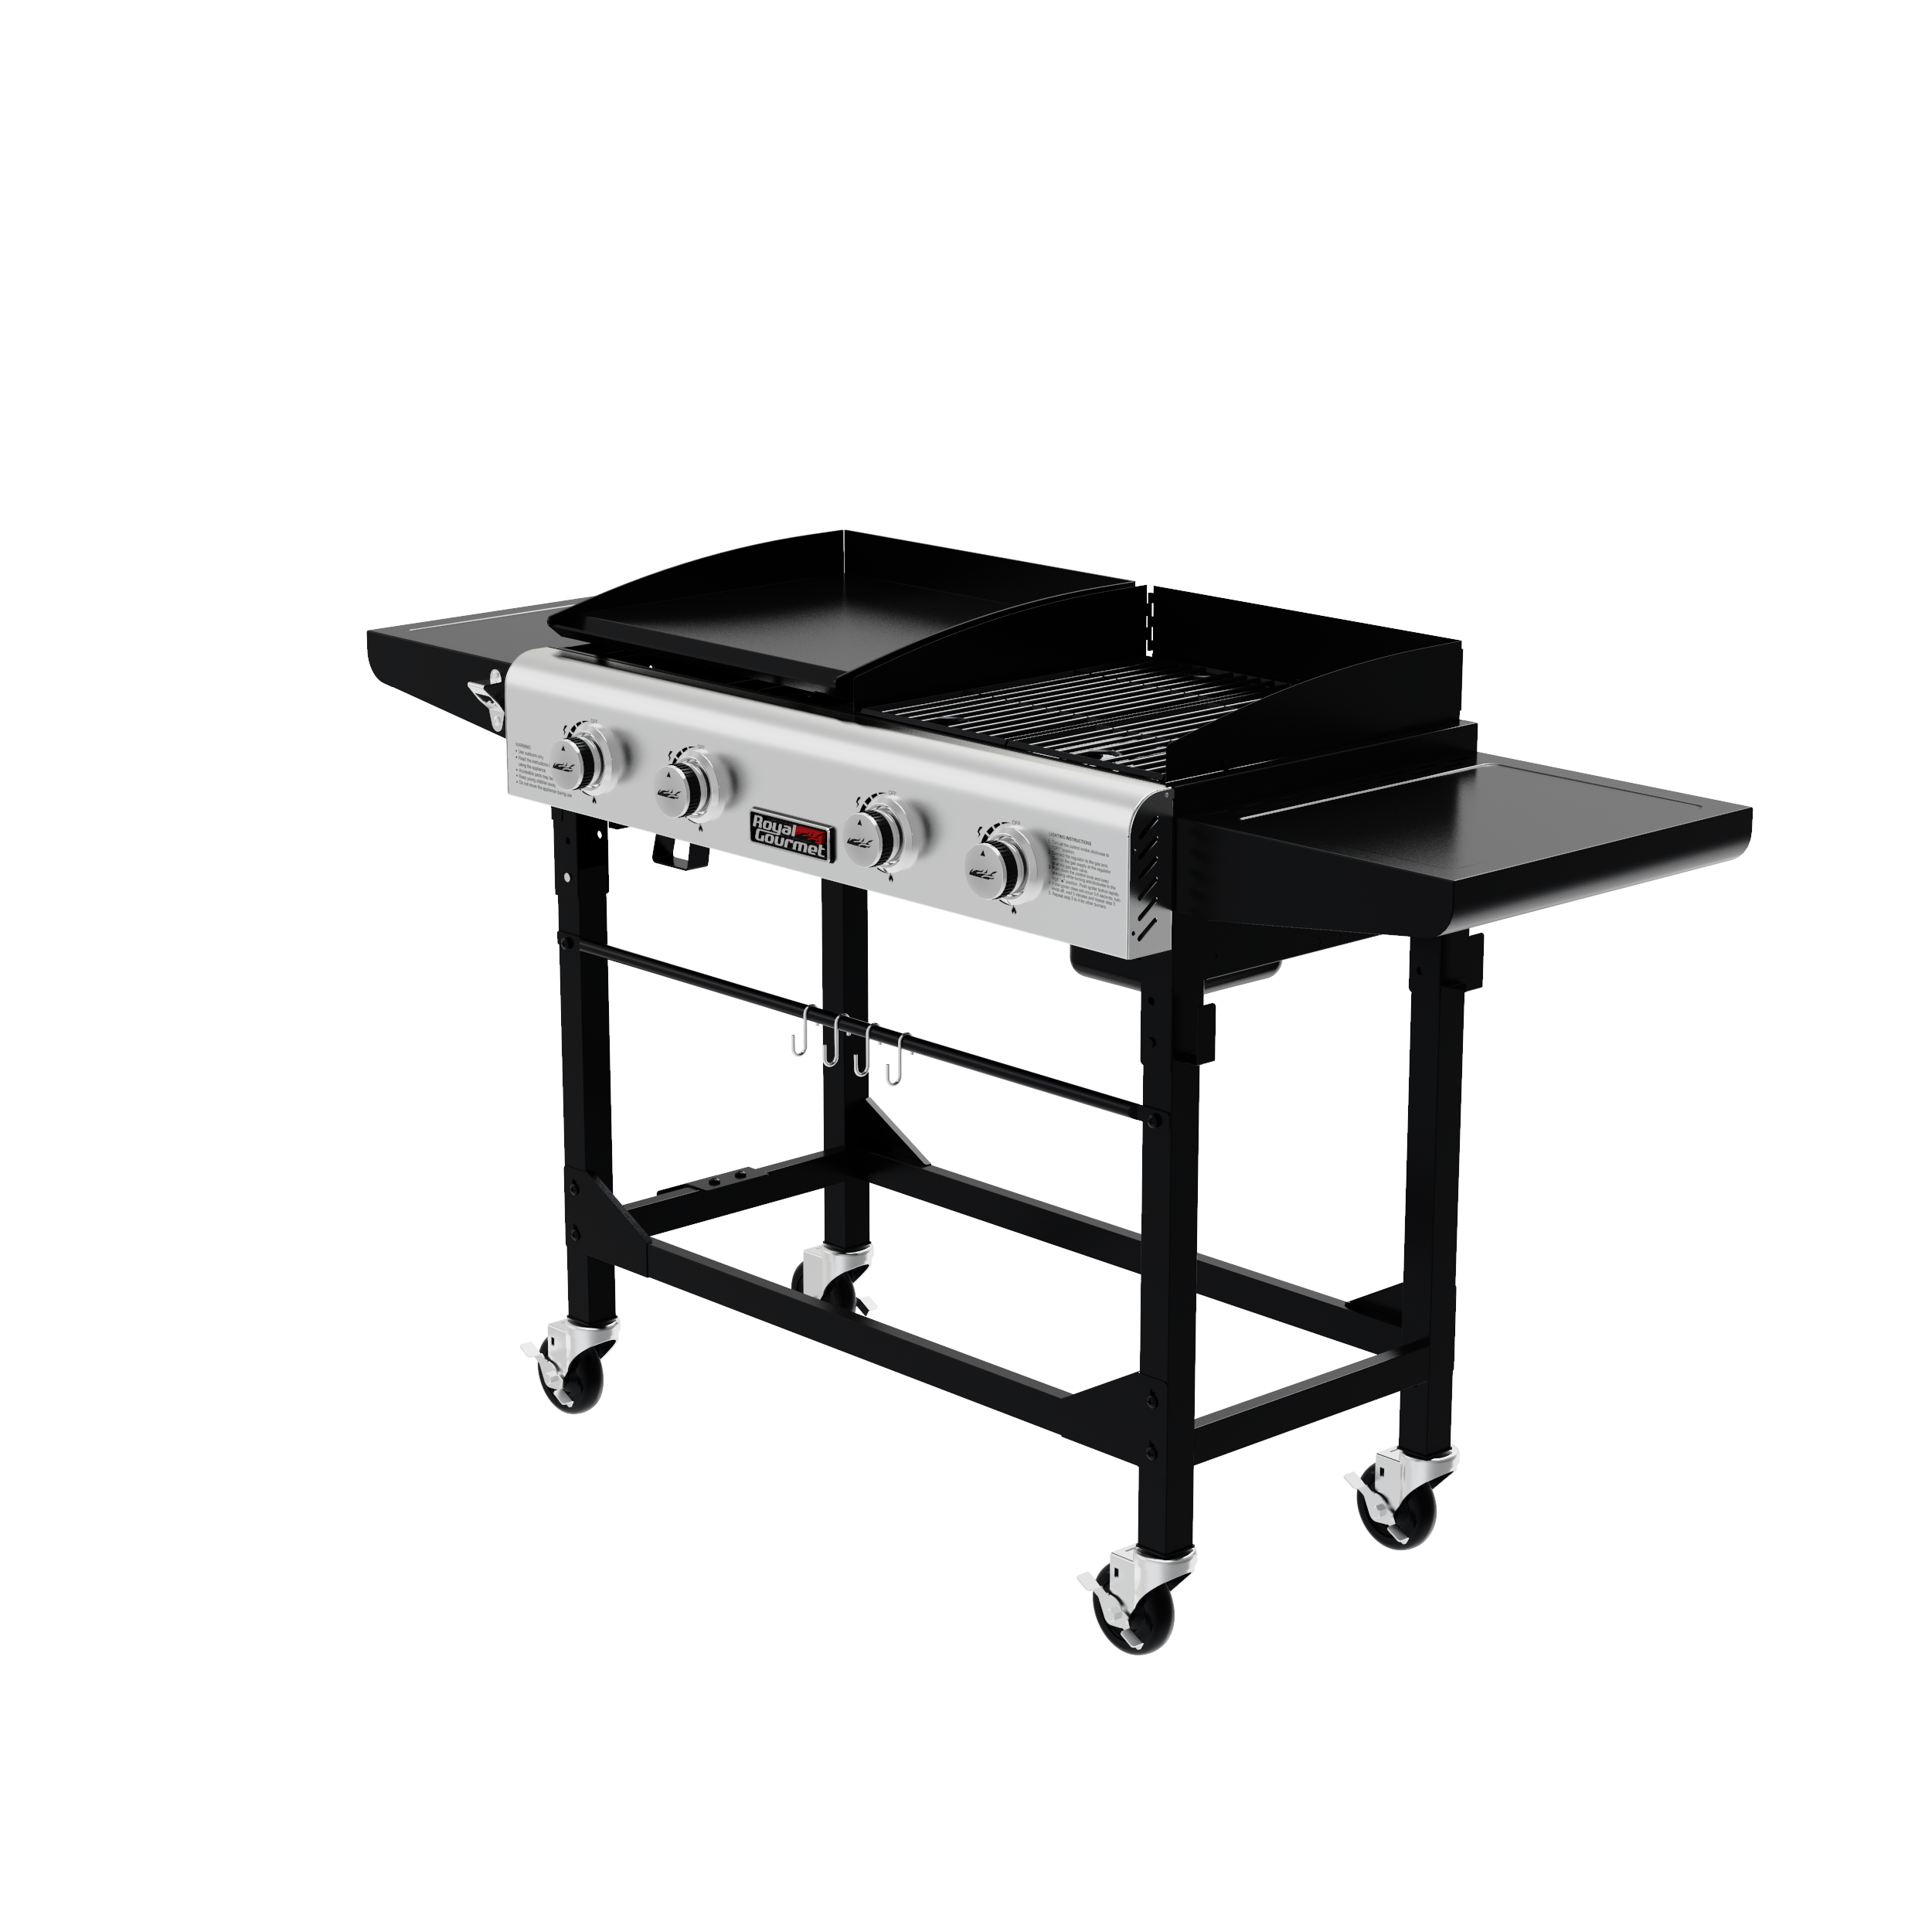 Royal Gourmet 4-Burner GD401 Portable Flat Top Gas Grill and